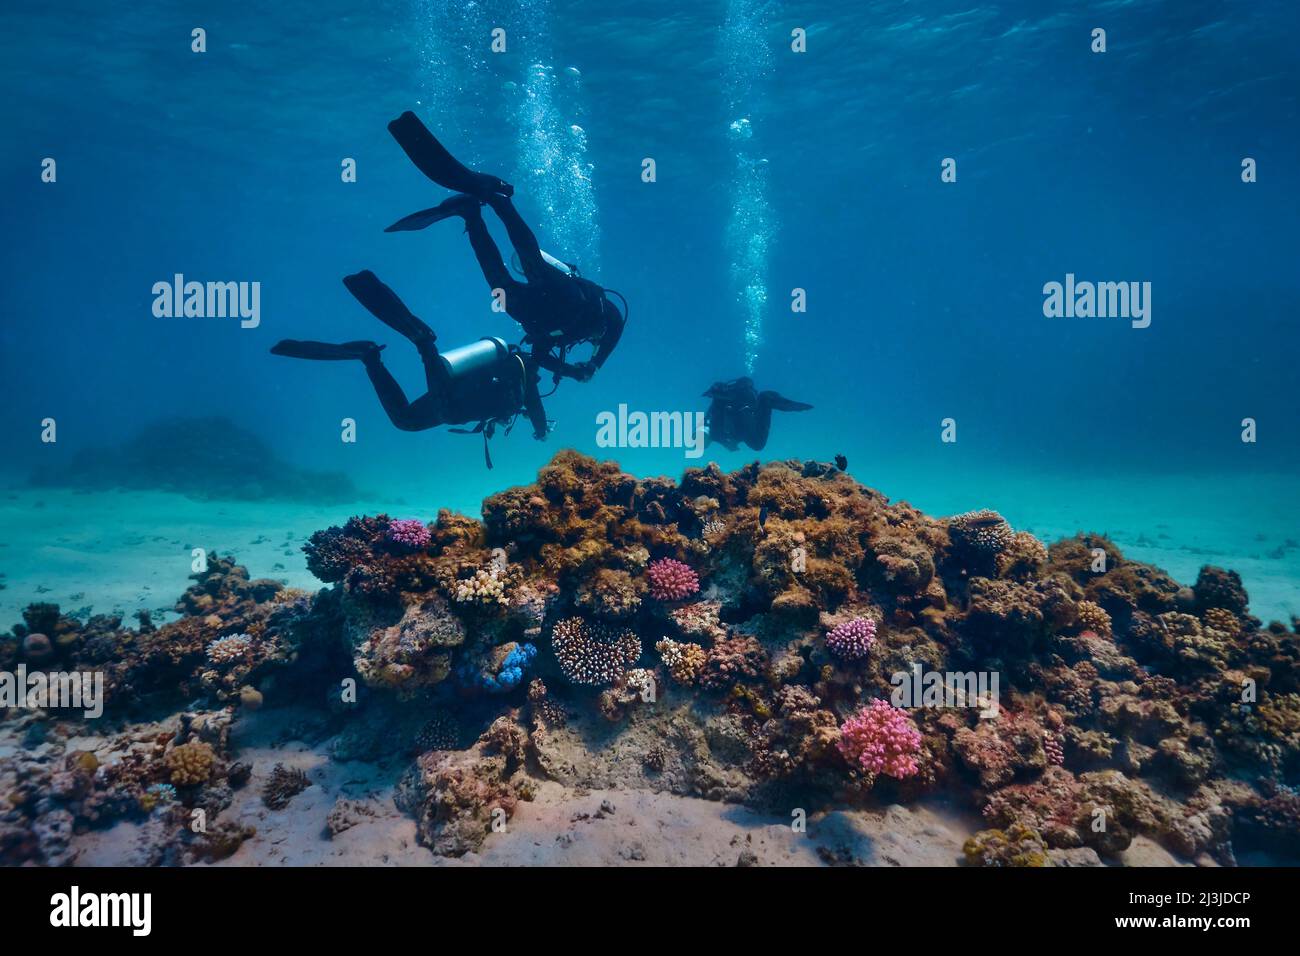 Scuba diving at Coral Reef, Makadi Bay, Hurghada, Egypt, Red Sea, Group of Divers Stock Photo